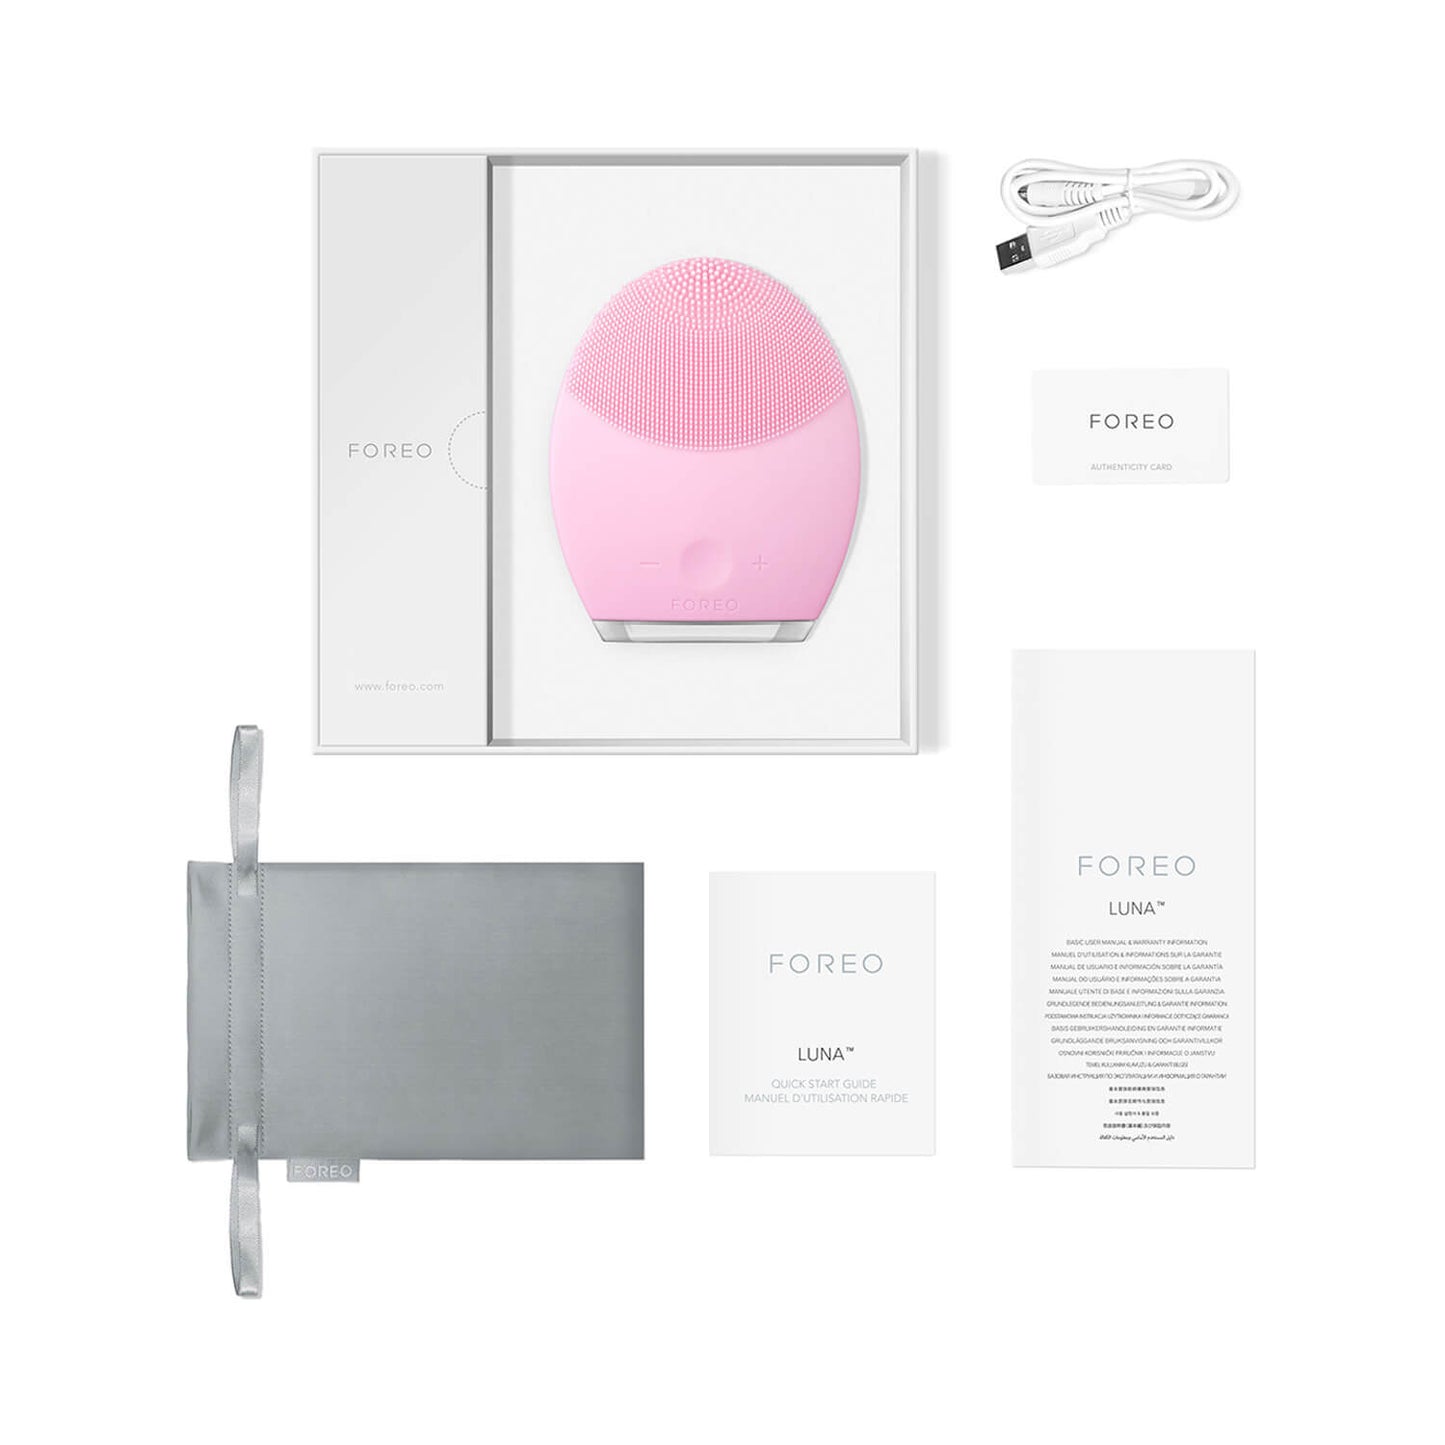 FOREO LUNA 2 Facial Cleansing Brush for Normal Skin What In the Box